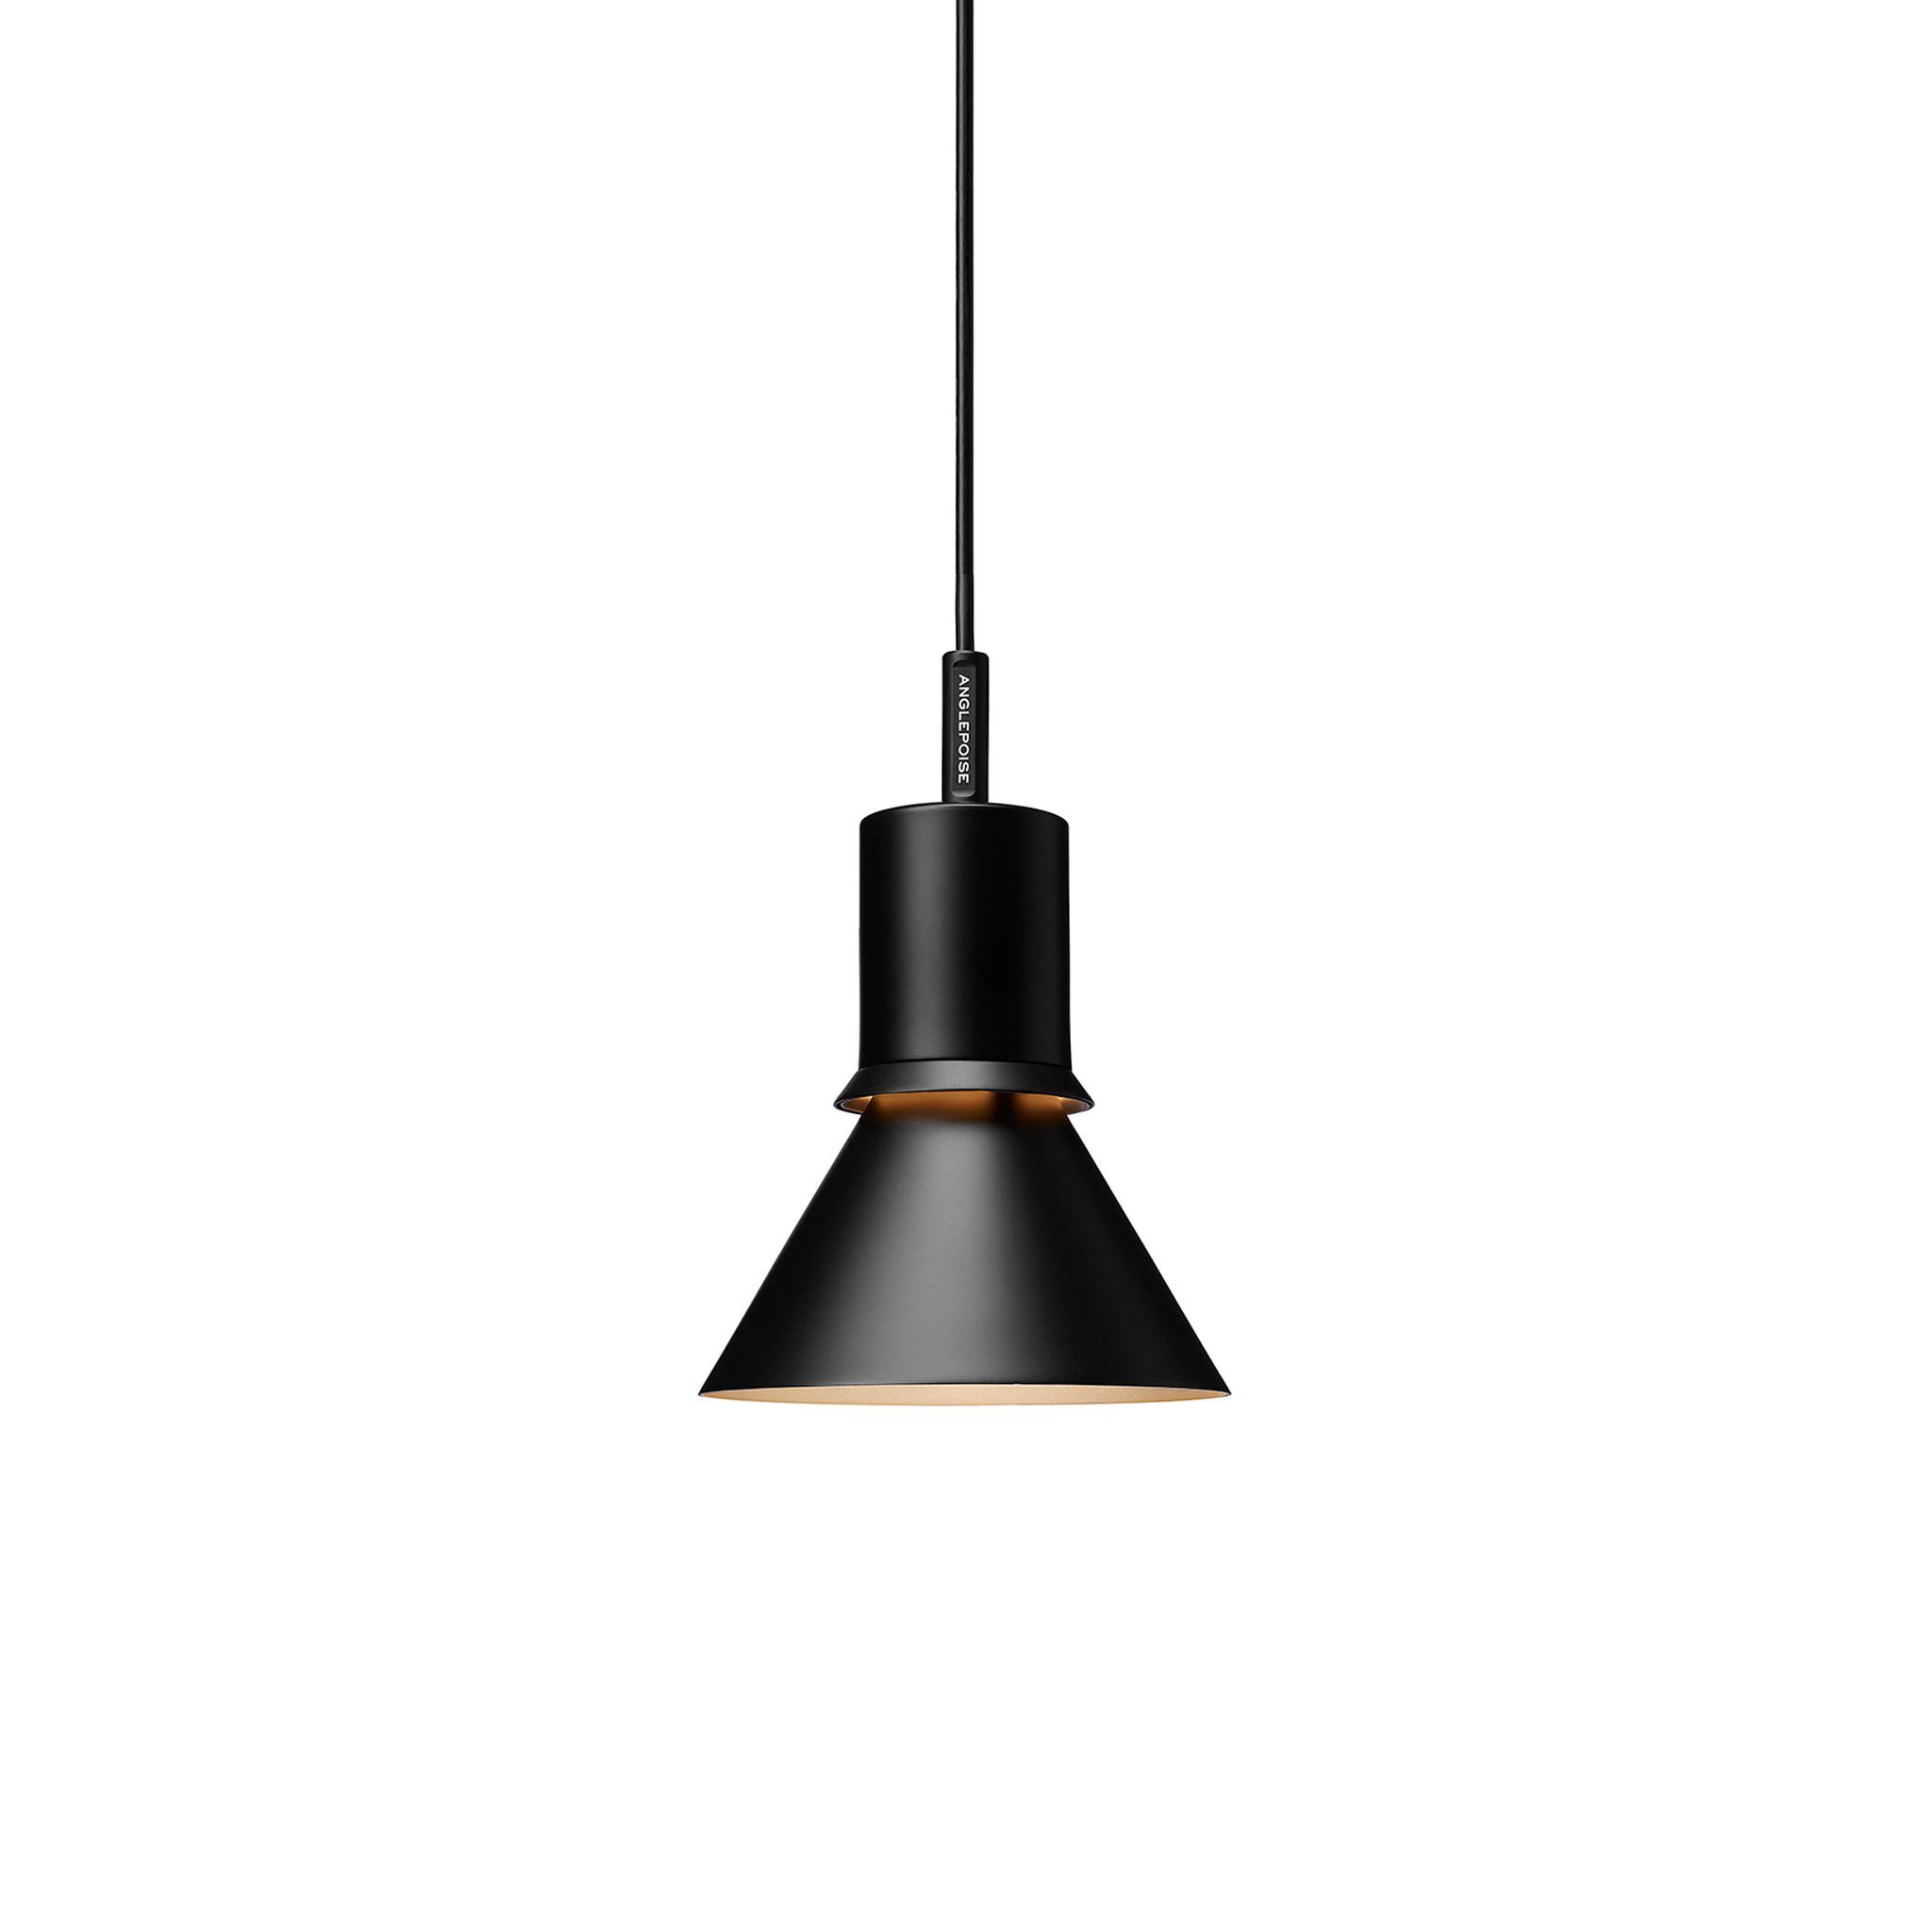 Type 80 Pendant by Kenneth Grange for Anglepoise